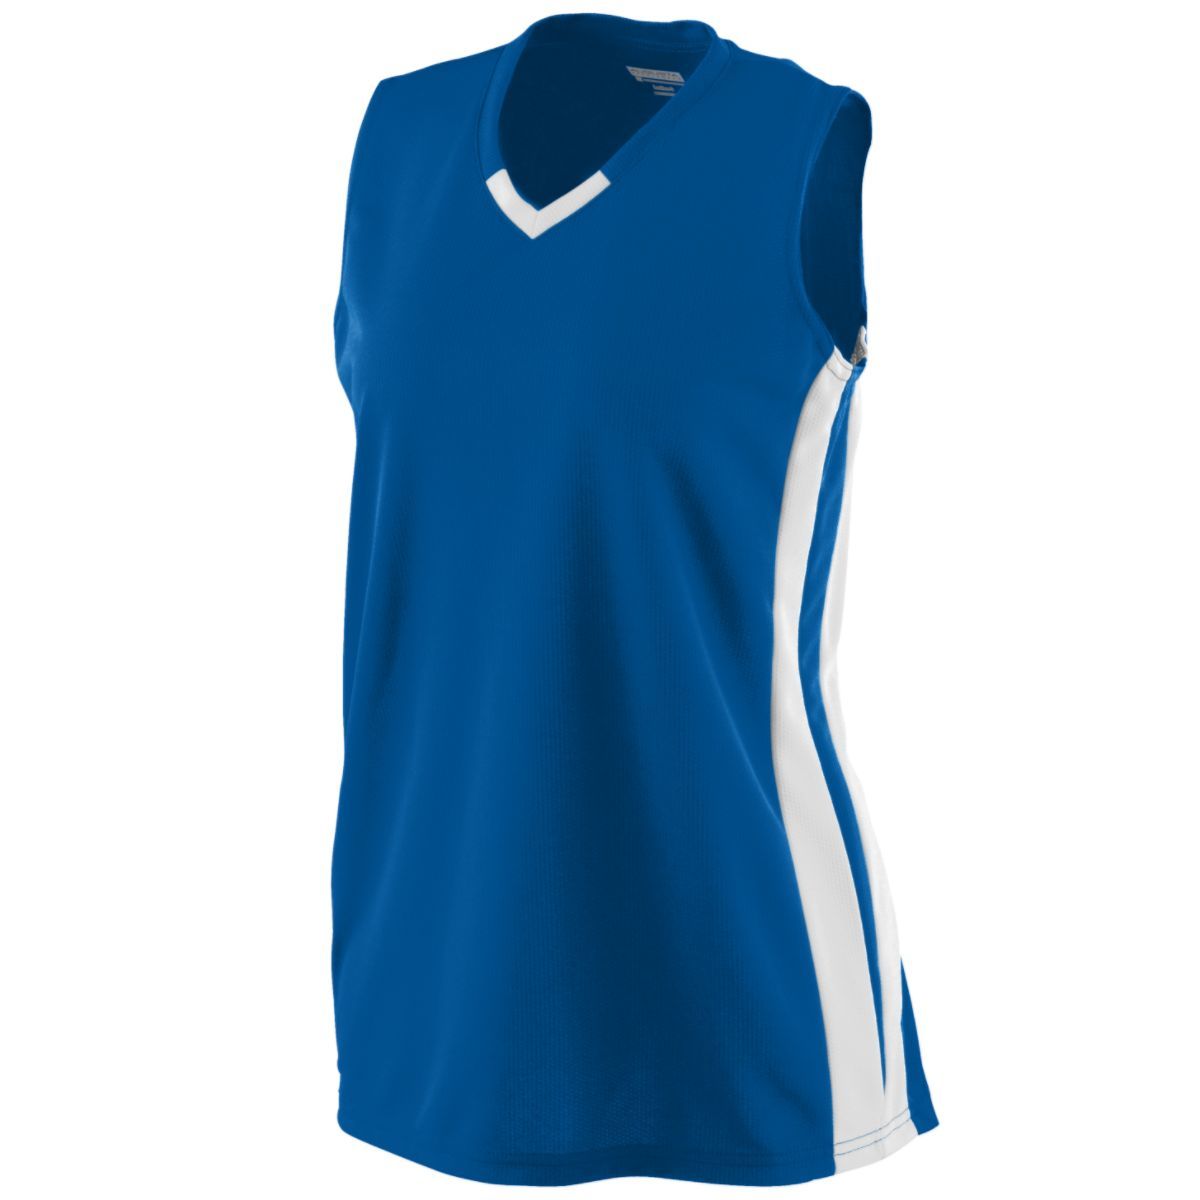 Augusta Sportswear Girls Wicking Mesh Powerhouse Jersey in Royal/White  -Part of the Girls, Augusta-Products, Softball, Girls-Jersey, Shirts product lines at KanaleyCreations.com